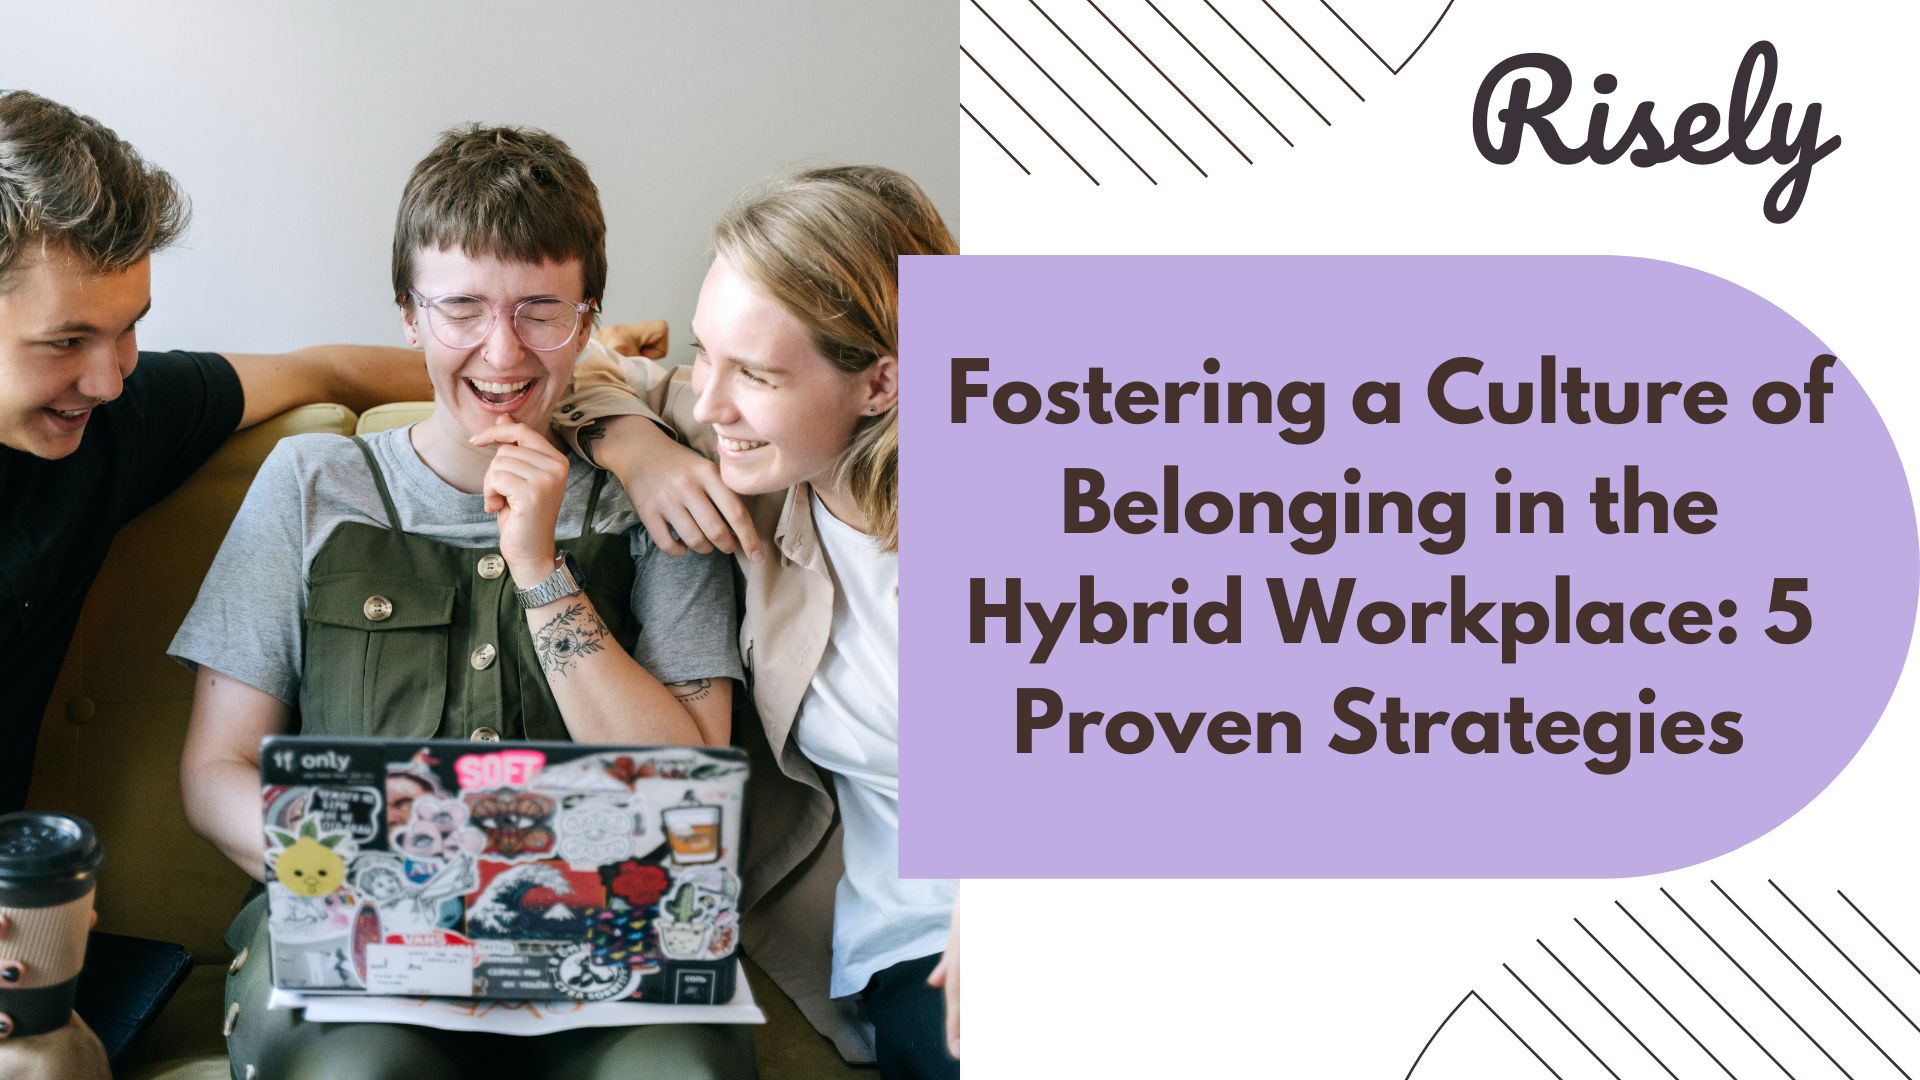 Fostering a Culture of Belonging in the Hybrid Workplace: 5 Proven Strategies